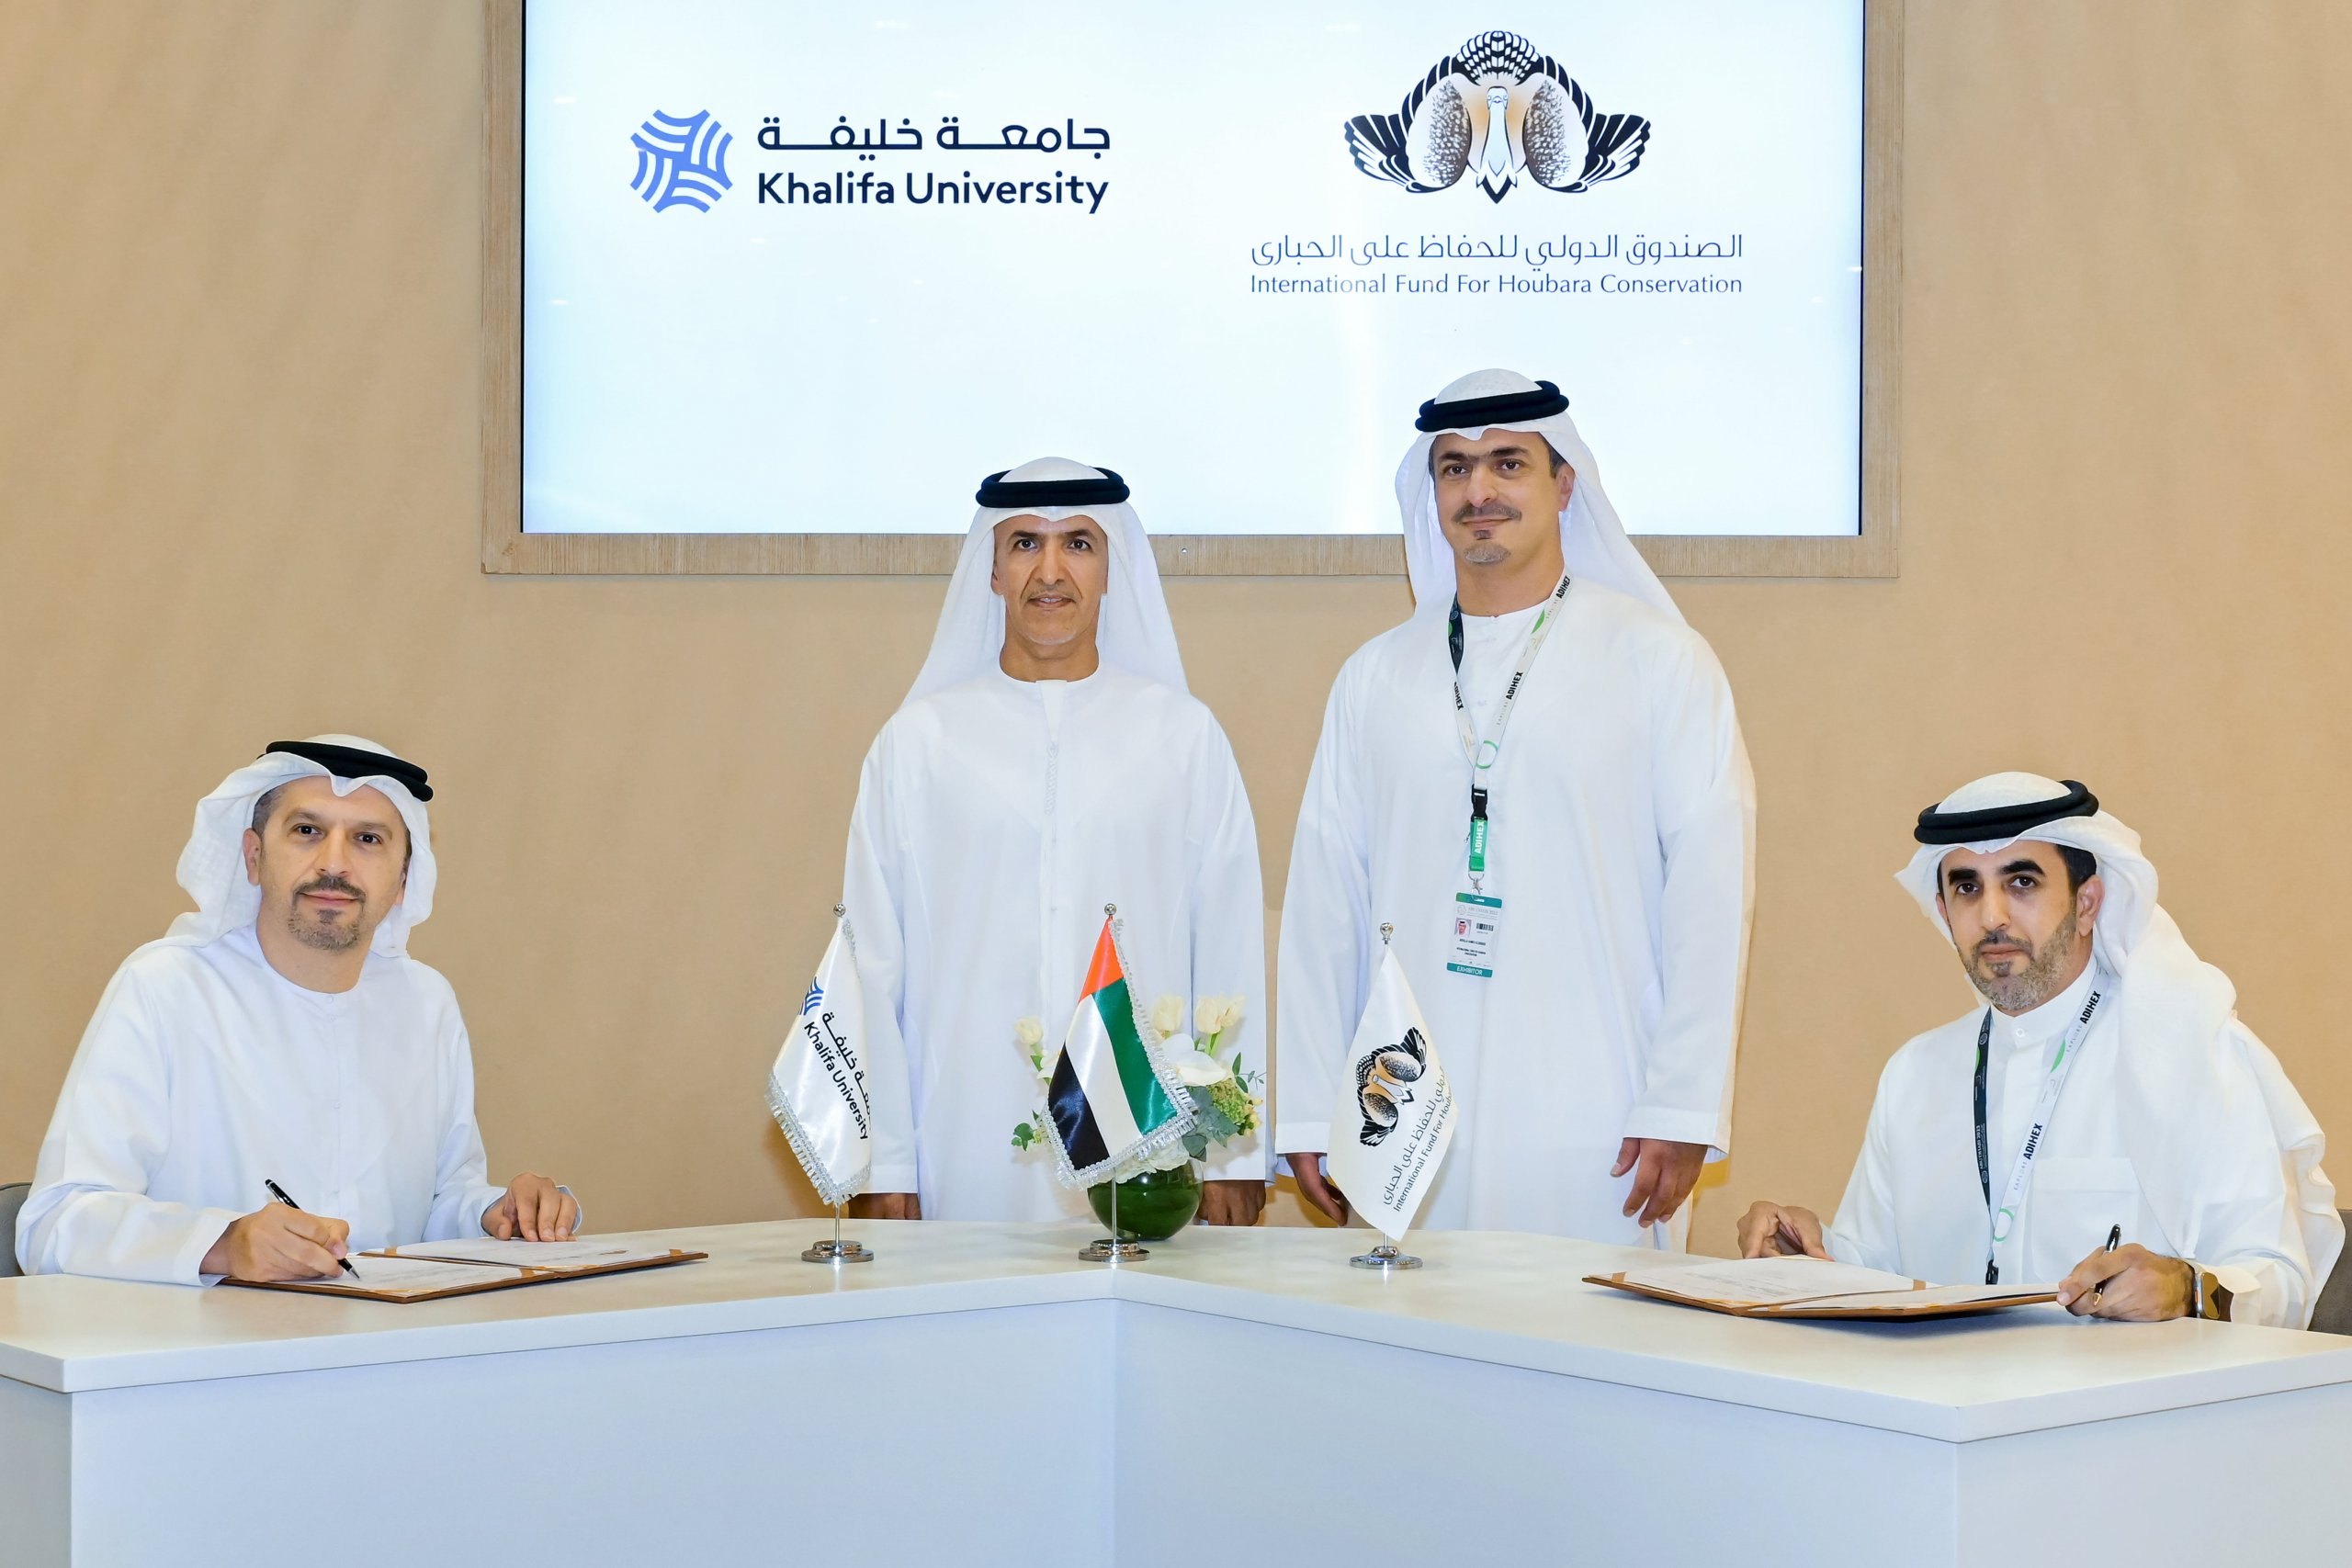 International Fund for Houbara Conservation partners with Khalifa University of Science and Technology to develop scientific research and training